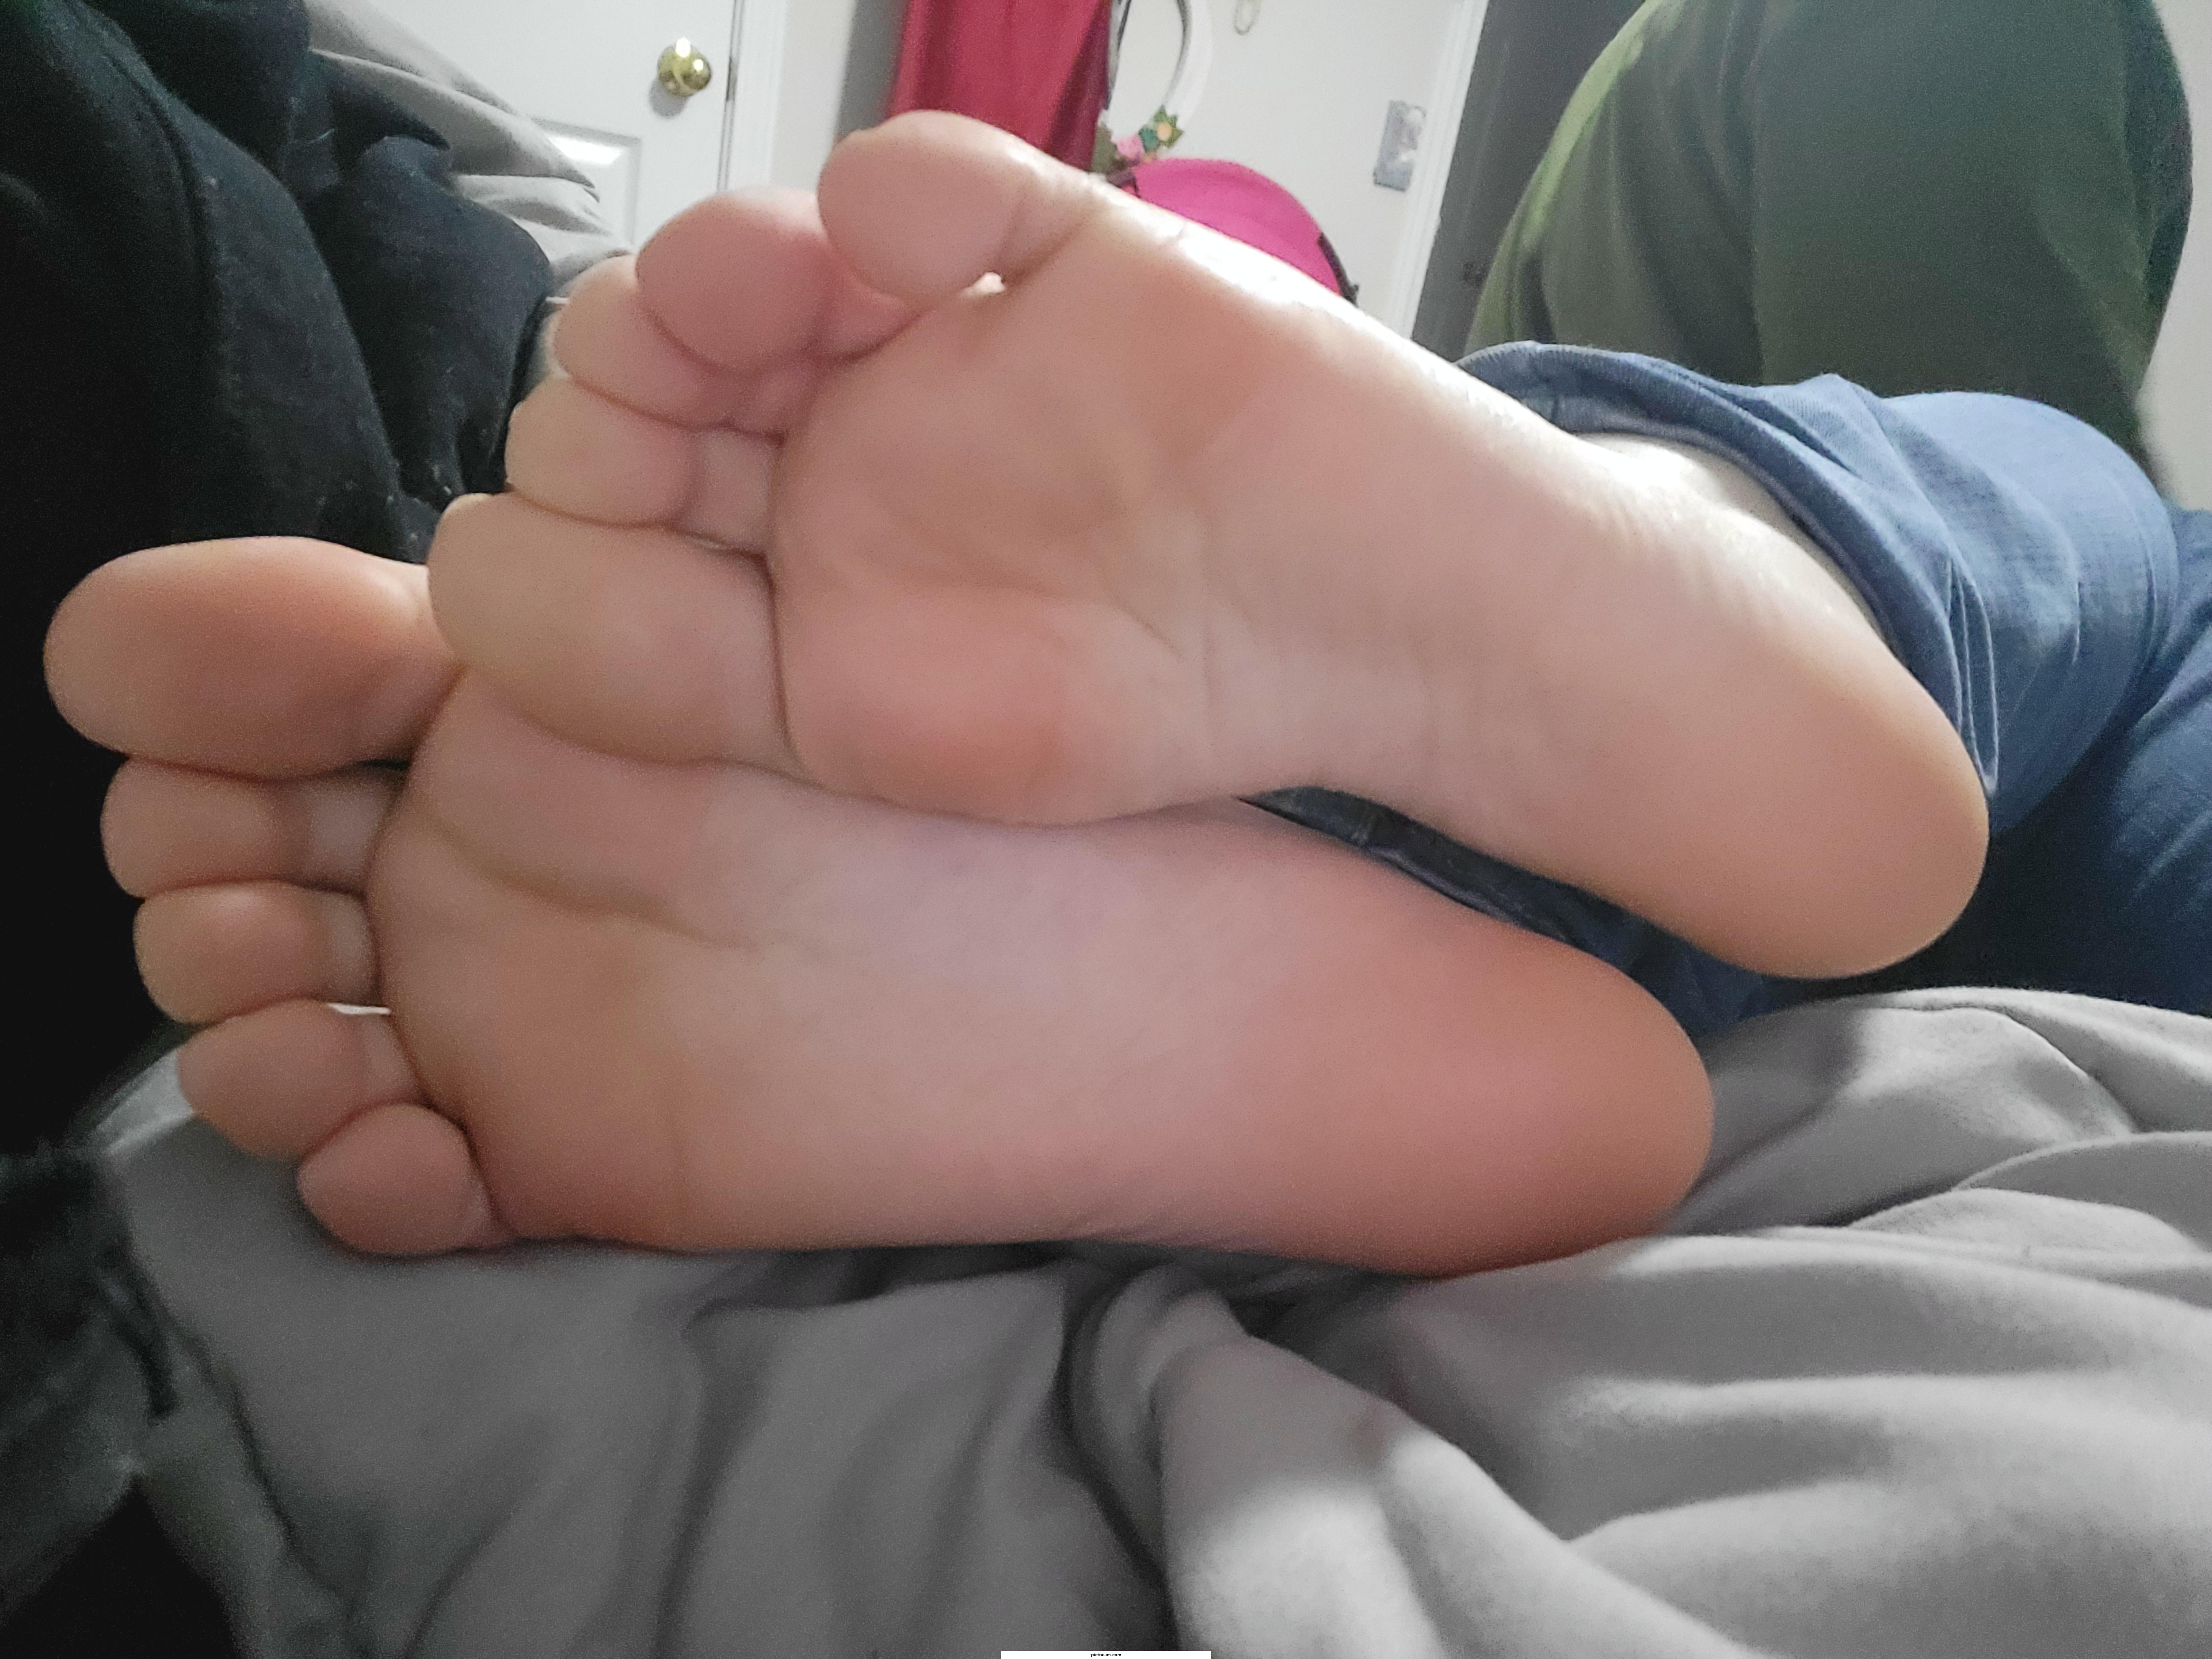 Get on ur knees and lick my soles🖤🤭 oc